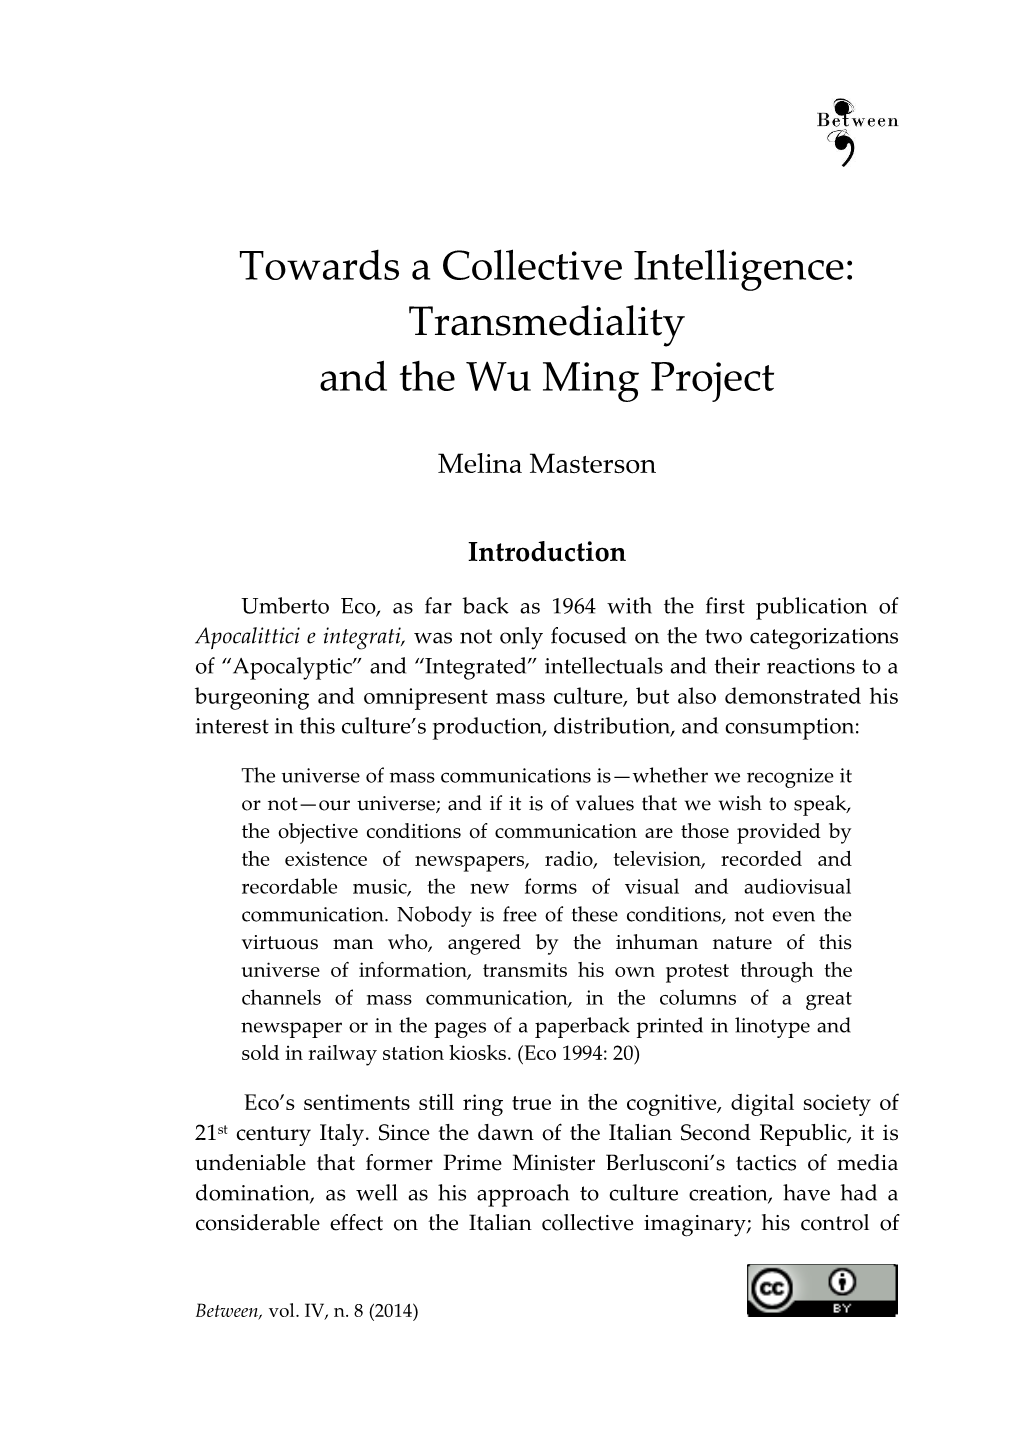 Towards a Collective Intelligence: Transmediality and the Wu Ming Project